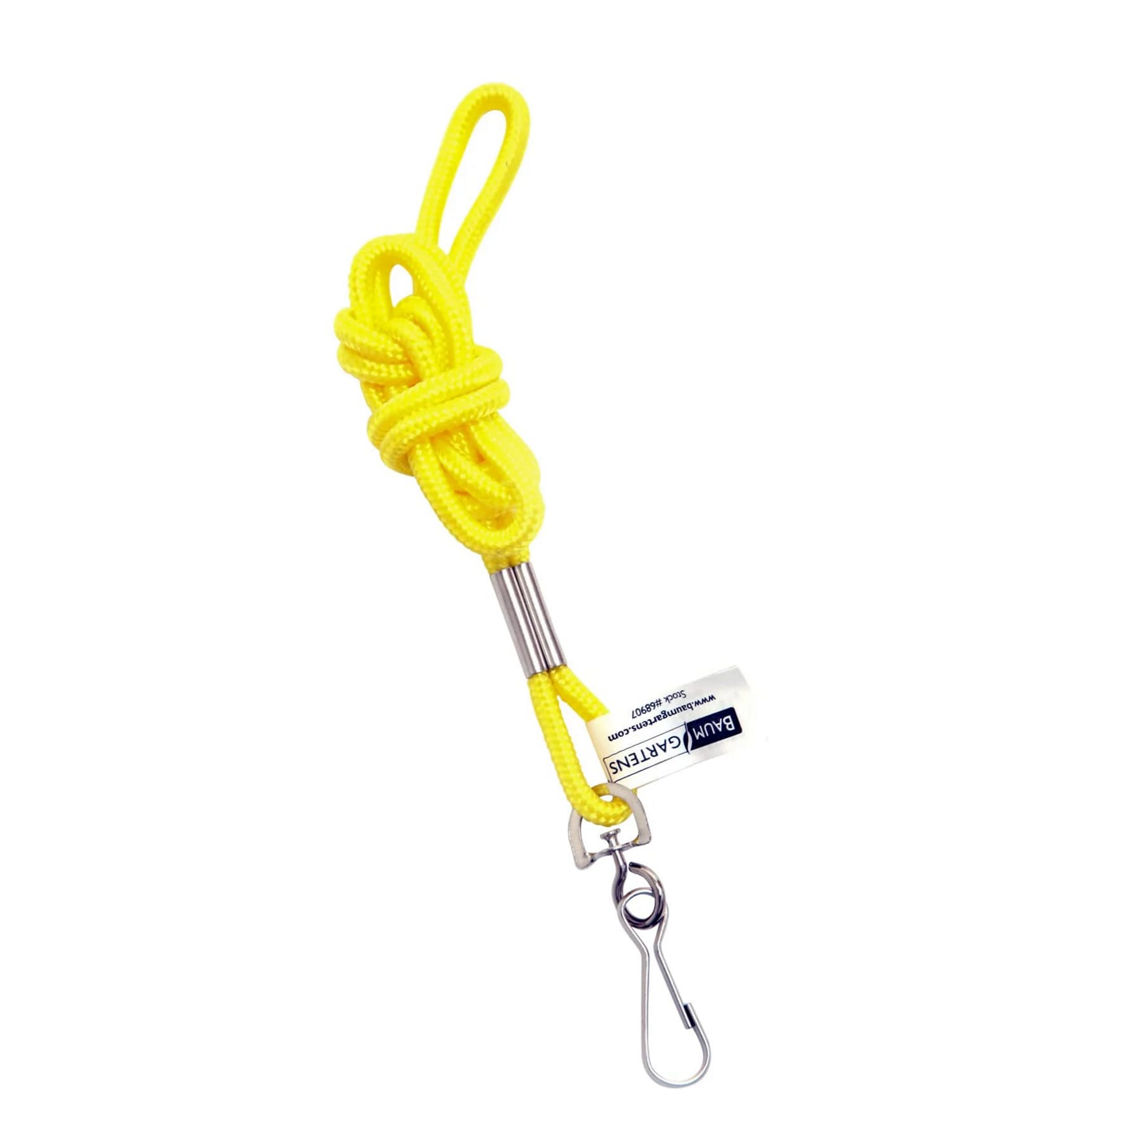 SICURIX Standard Lanyard Hook Rope Style, Yellow, Pack of 24 - Image 2 of 3